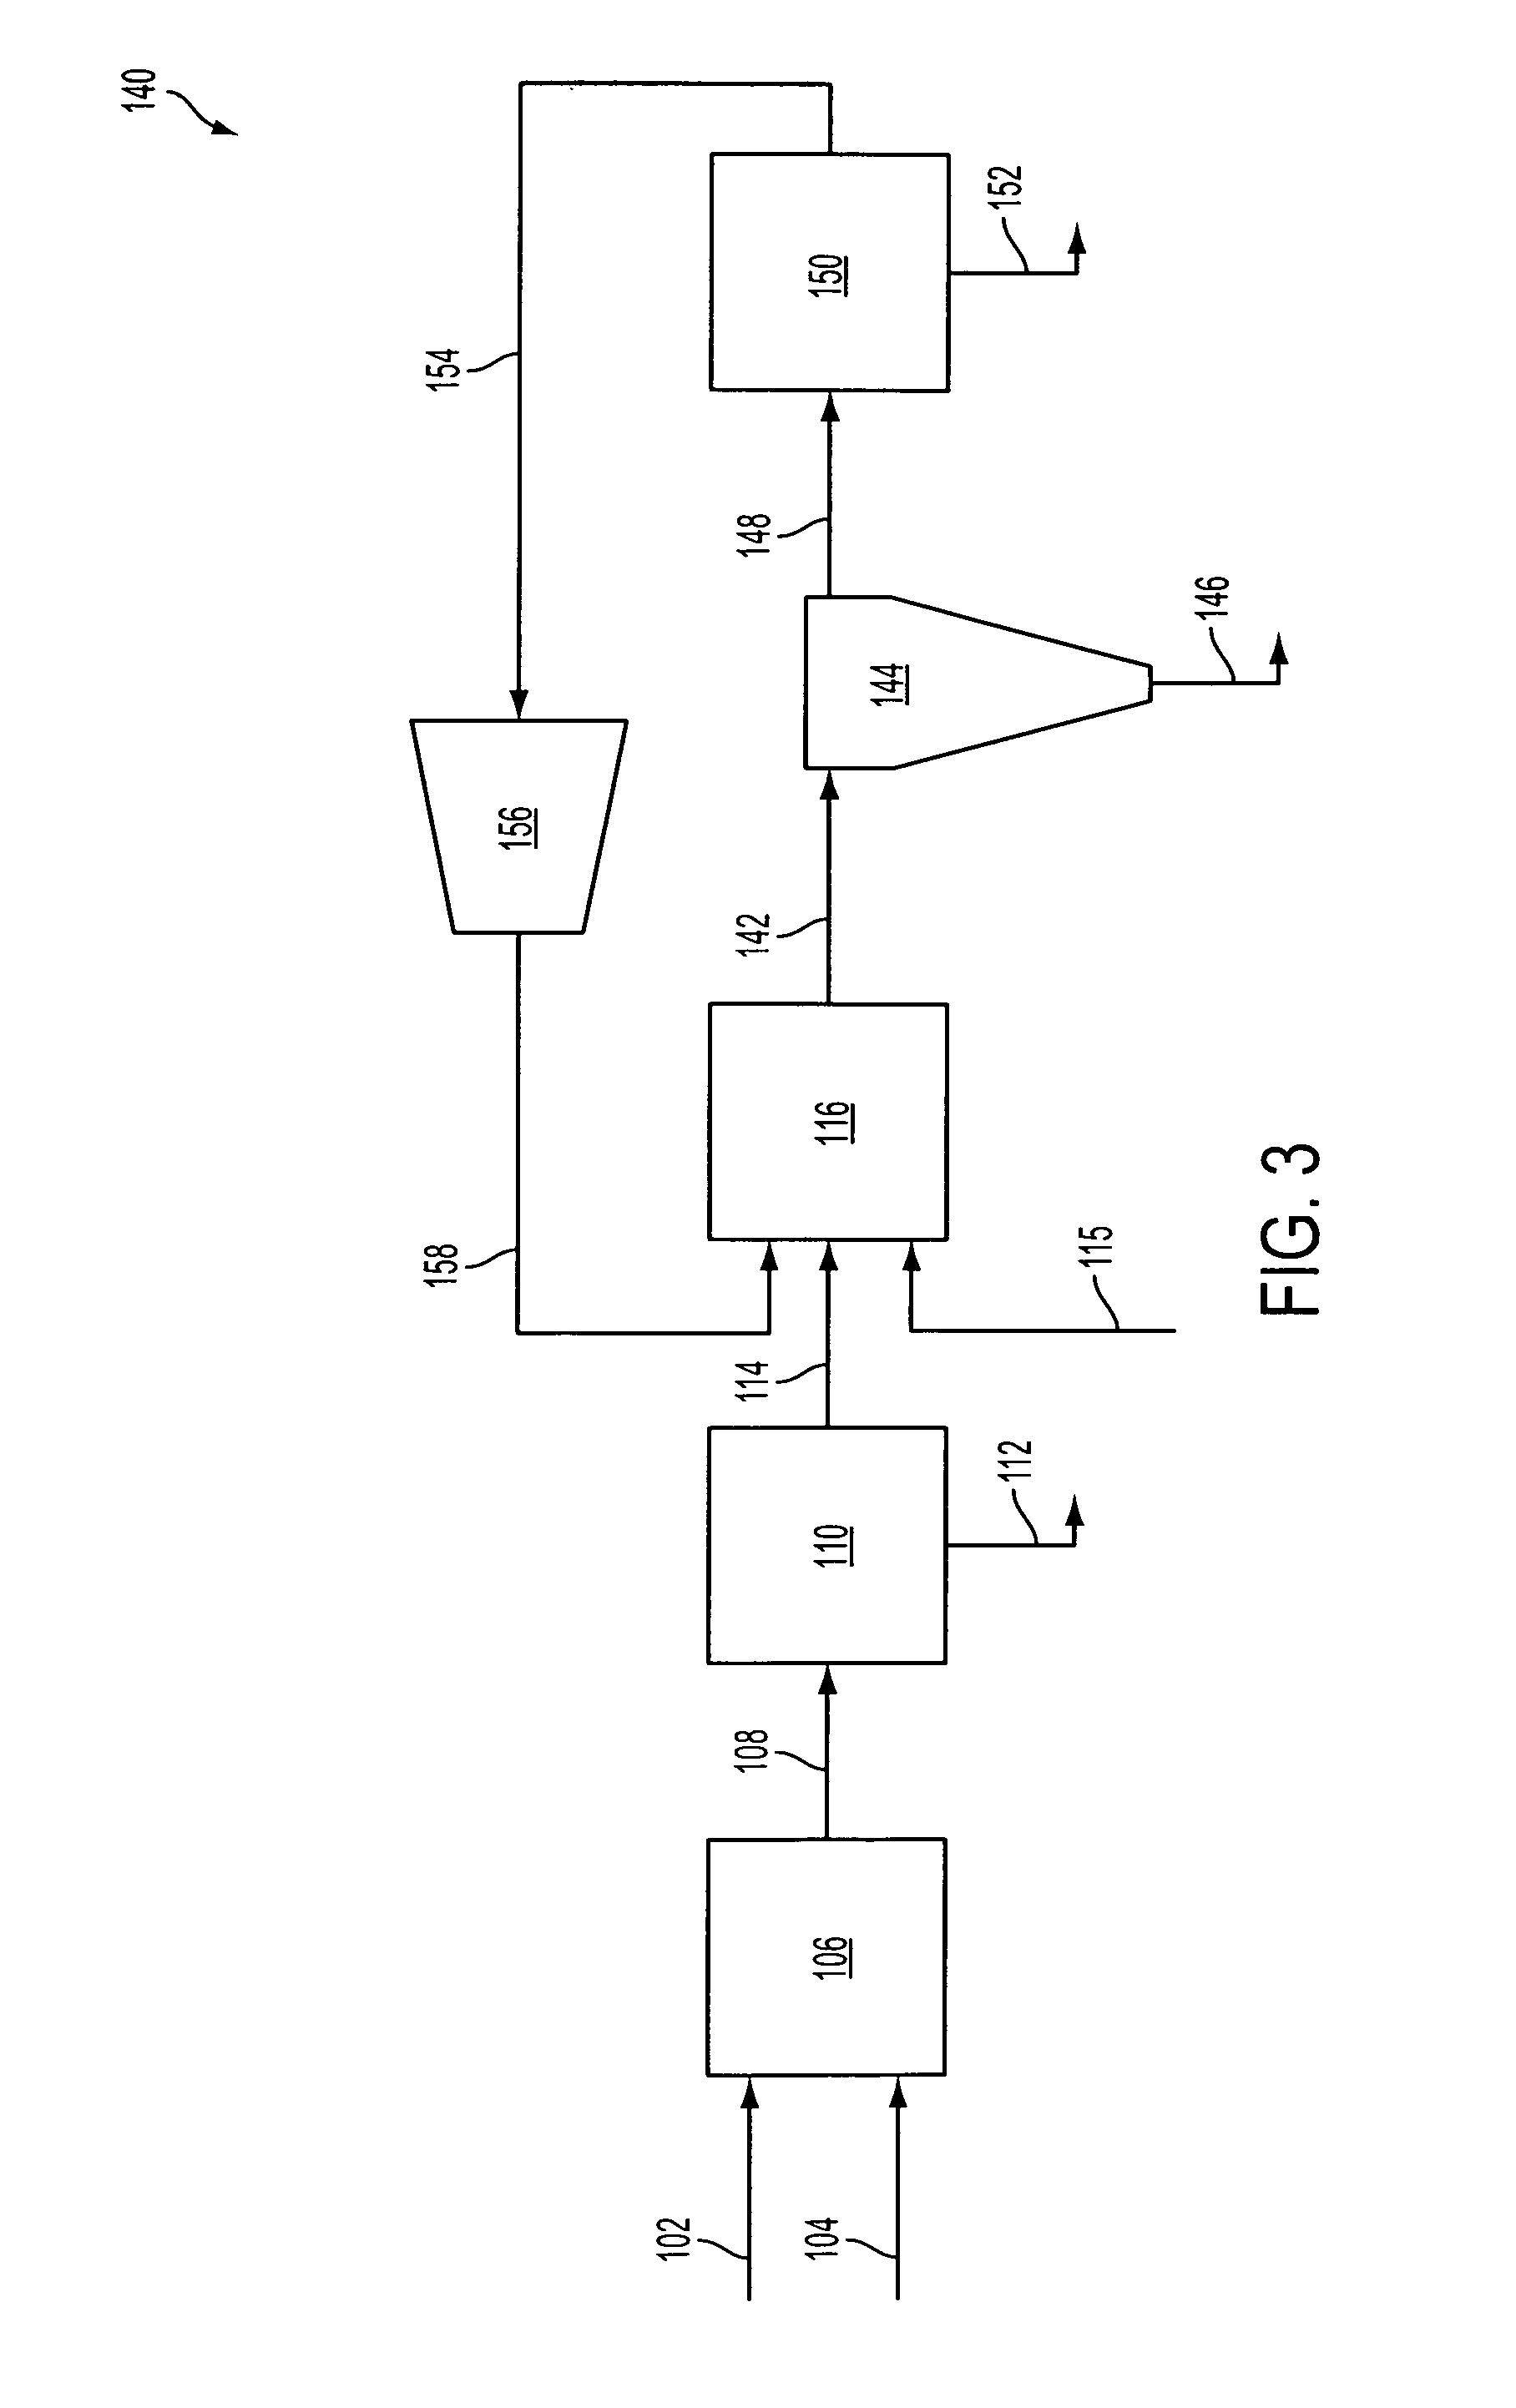 Methods for producing solid carbon by reducing carbon dioxide